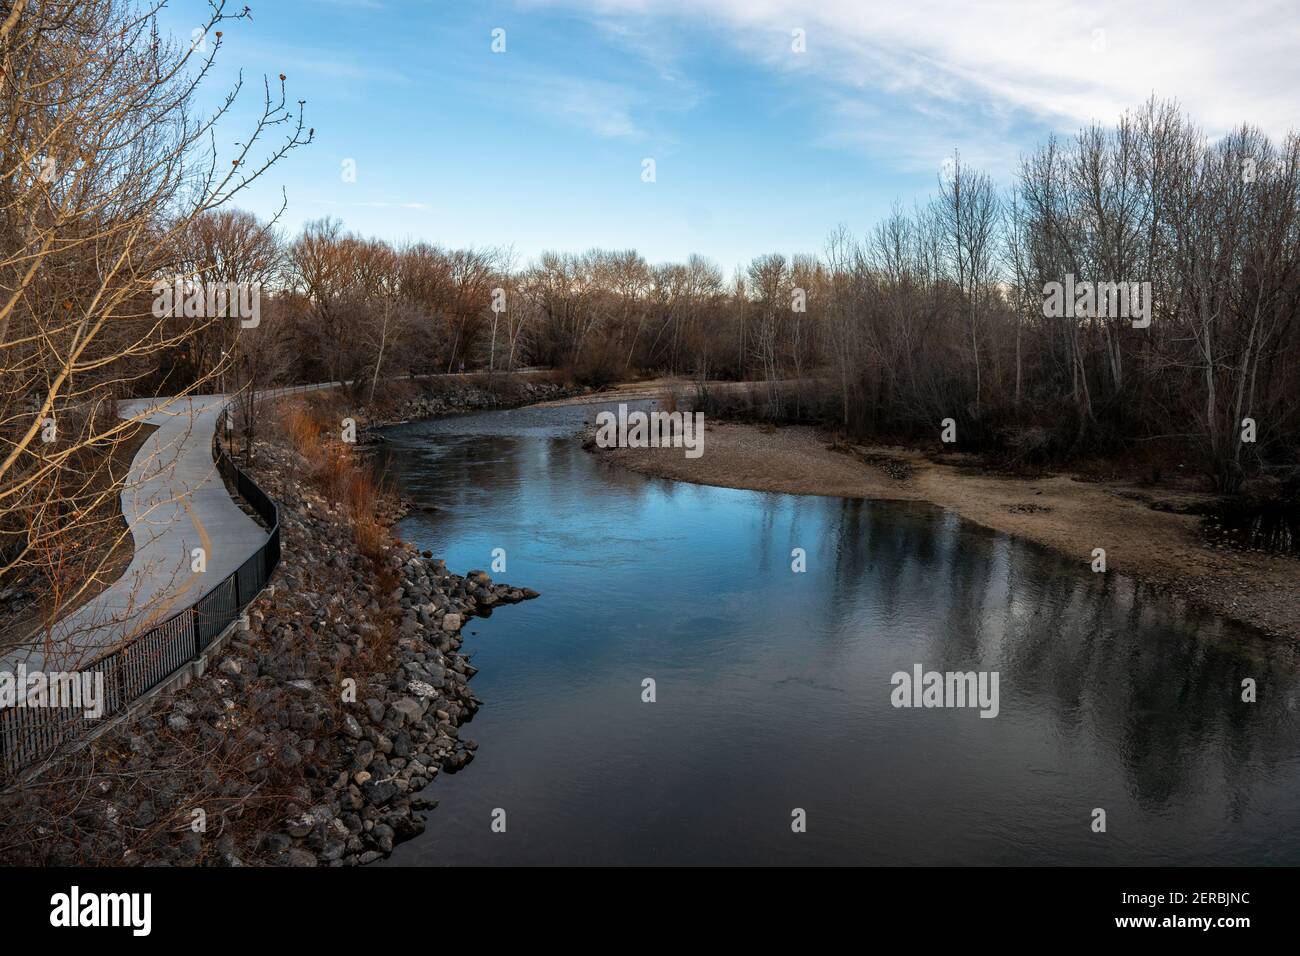 Late afternoon along the Boise River in January. Numerous s-curves provide an interesting design element. Stock Photo